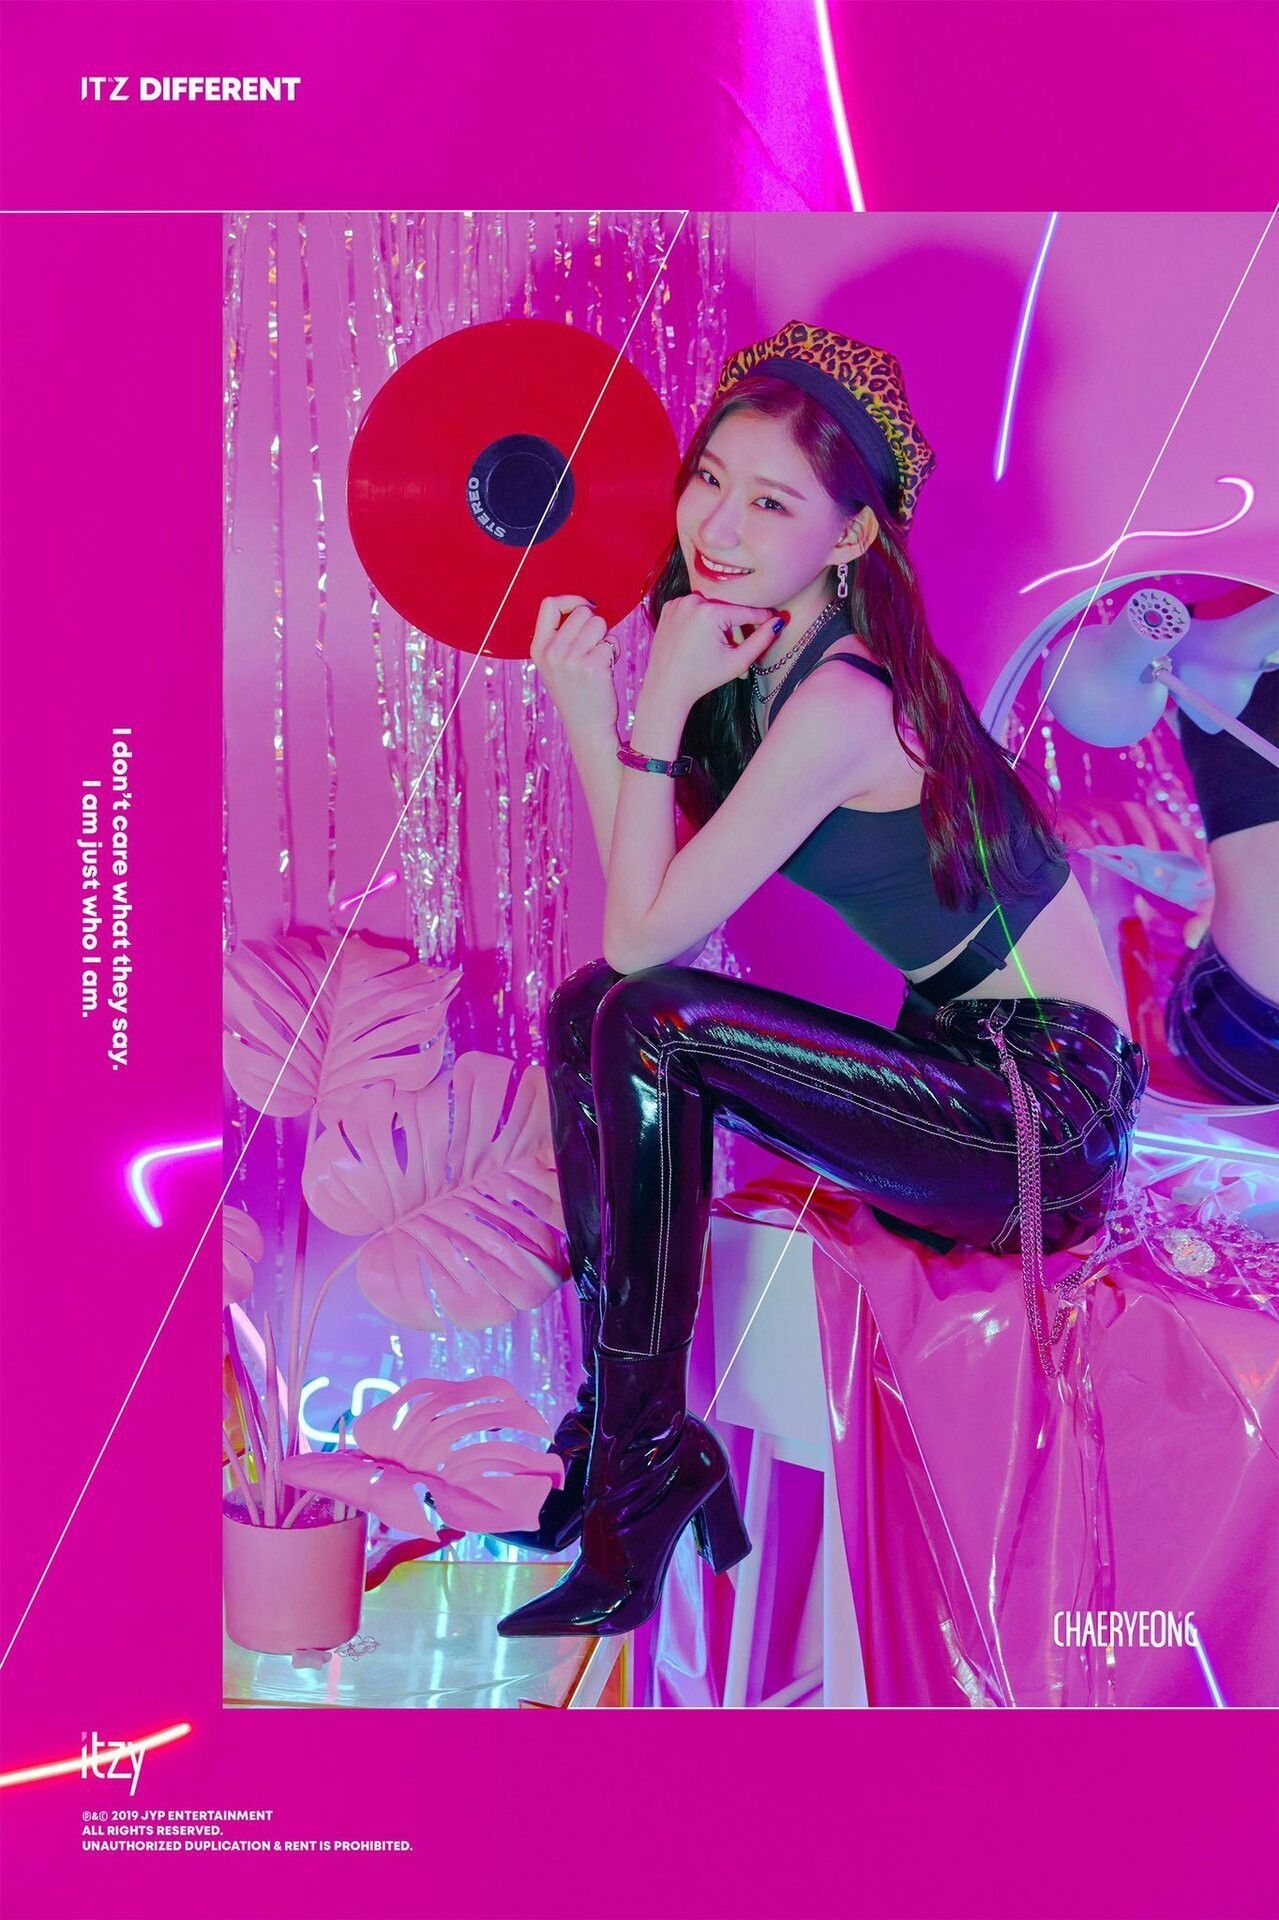 Itzy Chaeryoung Teaser 2 #Itzy #Chaeryoung. Itzy, Kpop, Teaser